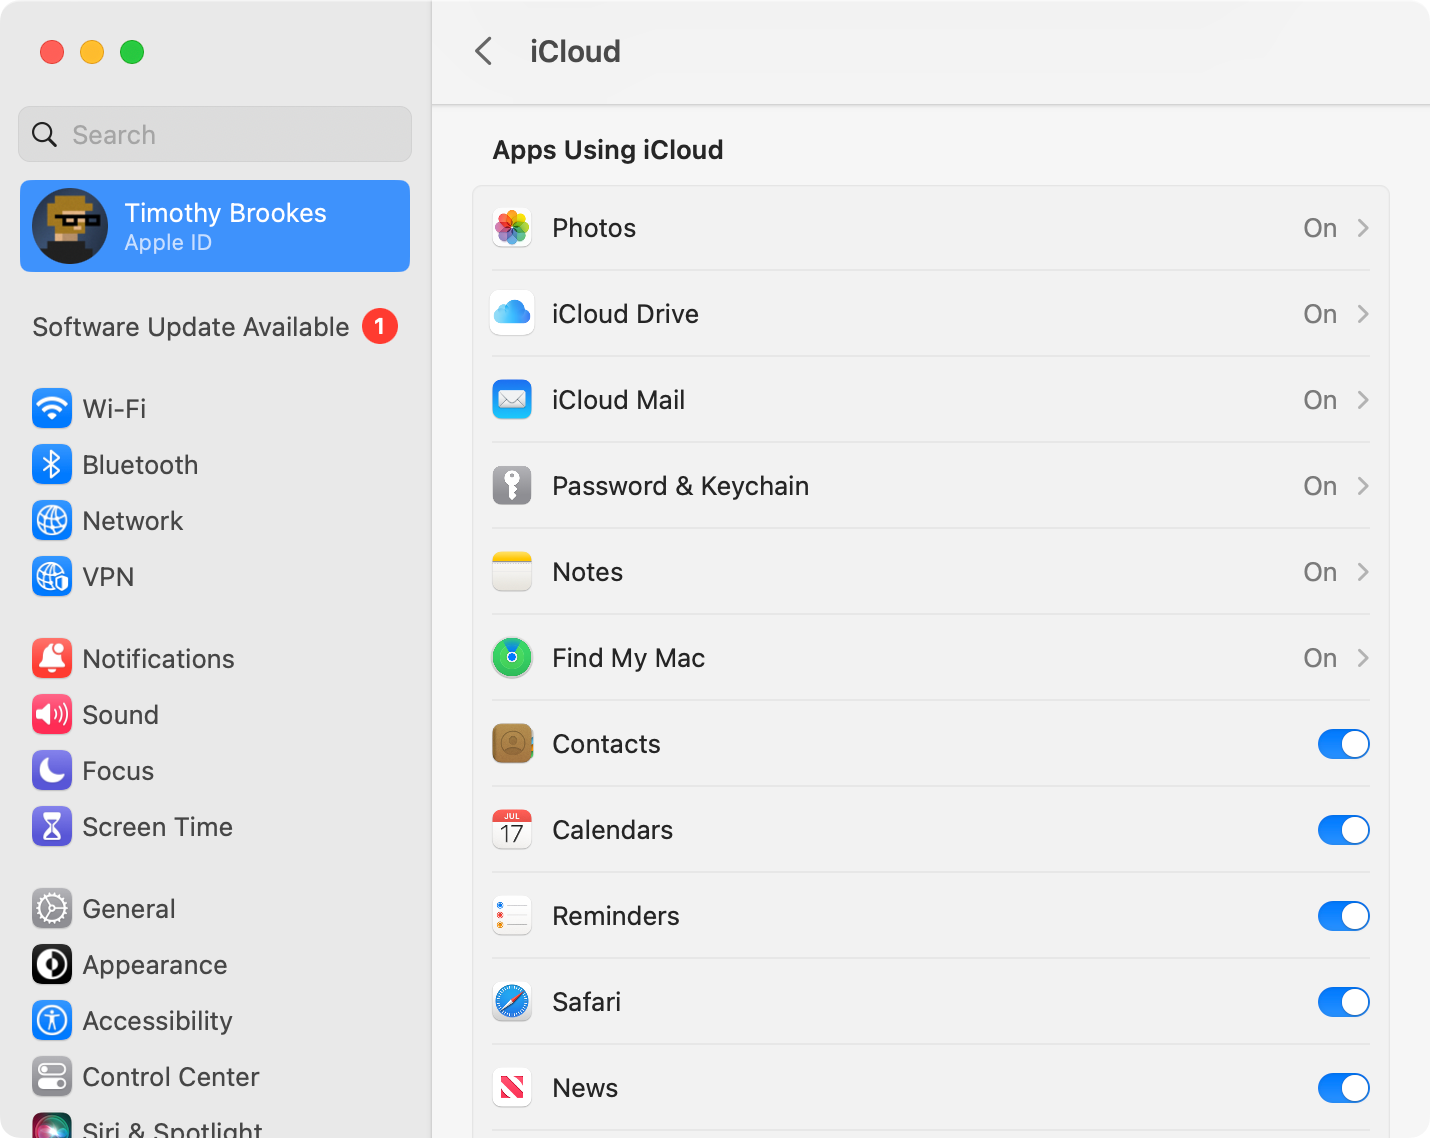 View a list of apps using iCloud on Mac